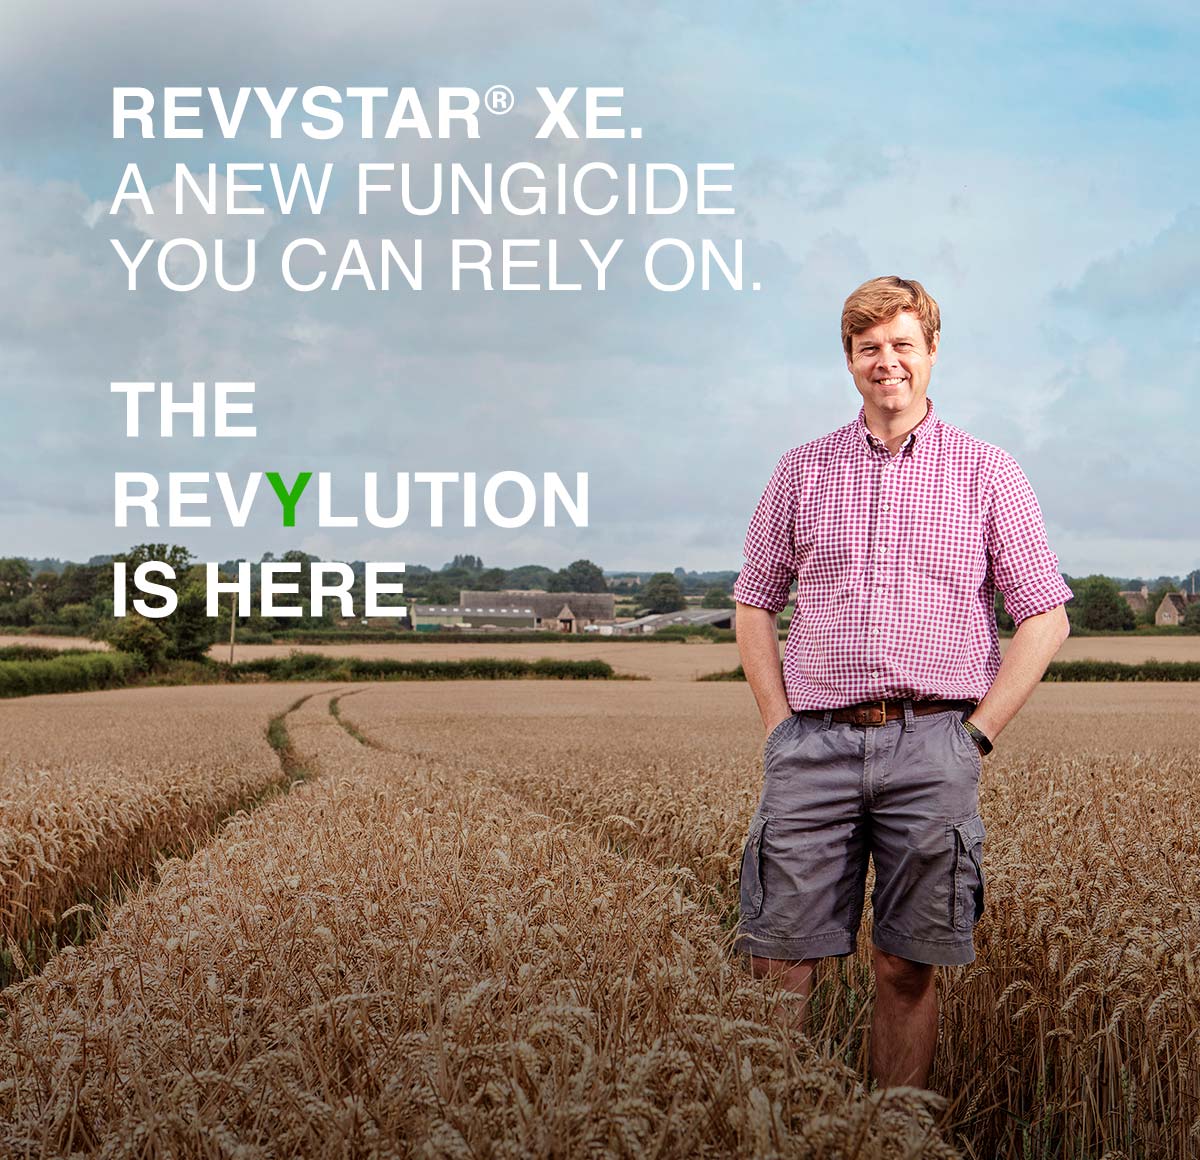 Revystar XE. A new fungicide you can rely on. The Revylution is here